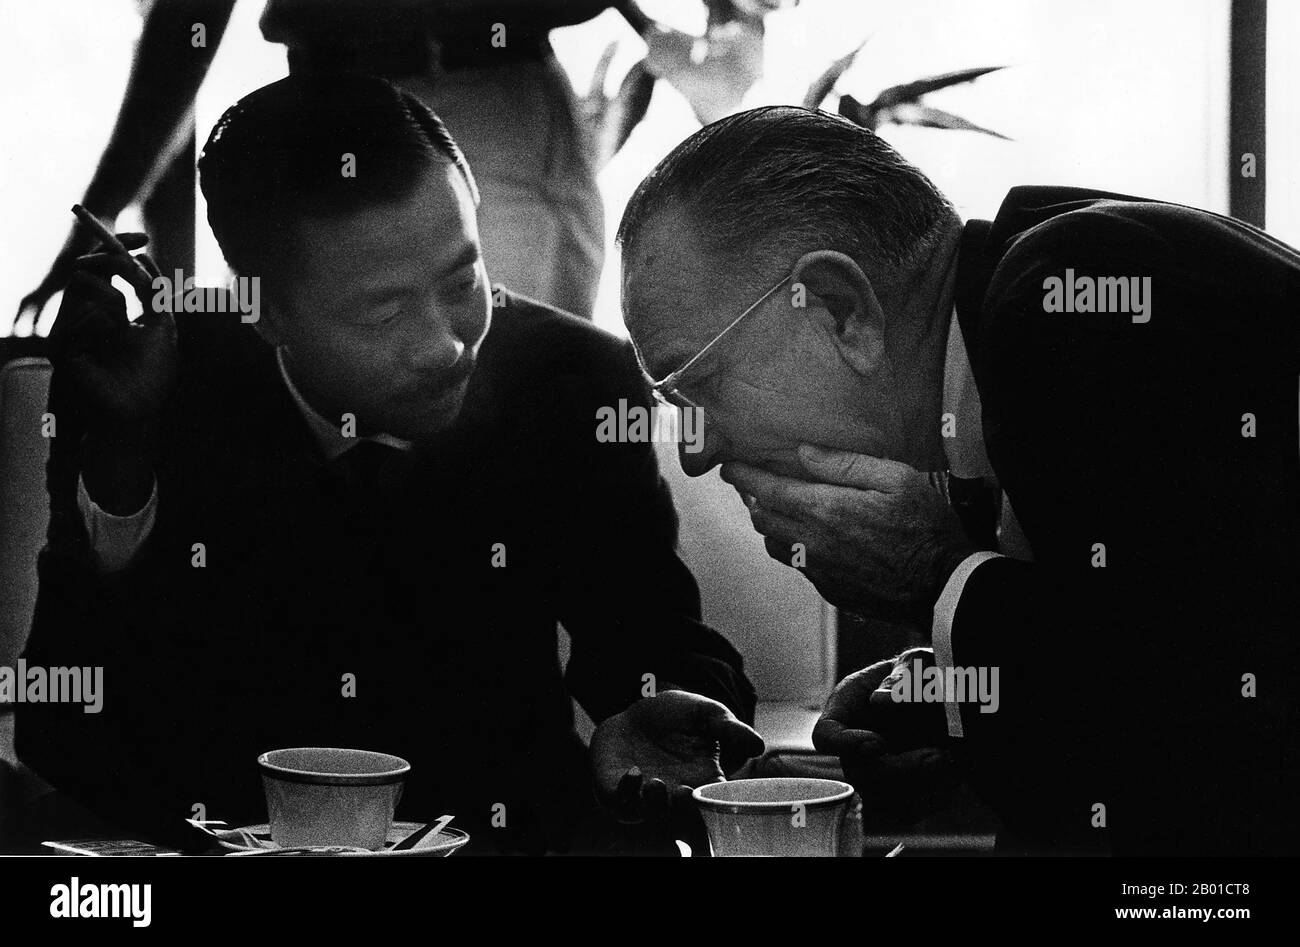 Vietnam/USA: Nguyen Cao Ky (8 September 1930 - 23 July 2011), Prime Minister of South Vietnam, confers with US President Lyndon Baines Johnson (27 August 1908 - 22 January 1973), Hawaii, 8 February 1966.  Nguyễn Cao Kỳ served as the Chief of the Vietnam Air Force in the 1960s, before leading the nation as the Prime Minister of South Vietnam in a military junta from 1965 to 1967. Then, until his retirement from politics in 1971, he served as Vice President to General Nguyễn Văn Thiệu, in a nominally civilian administration. Stock Photo